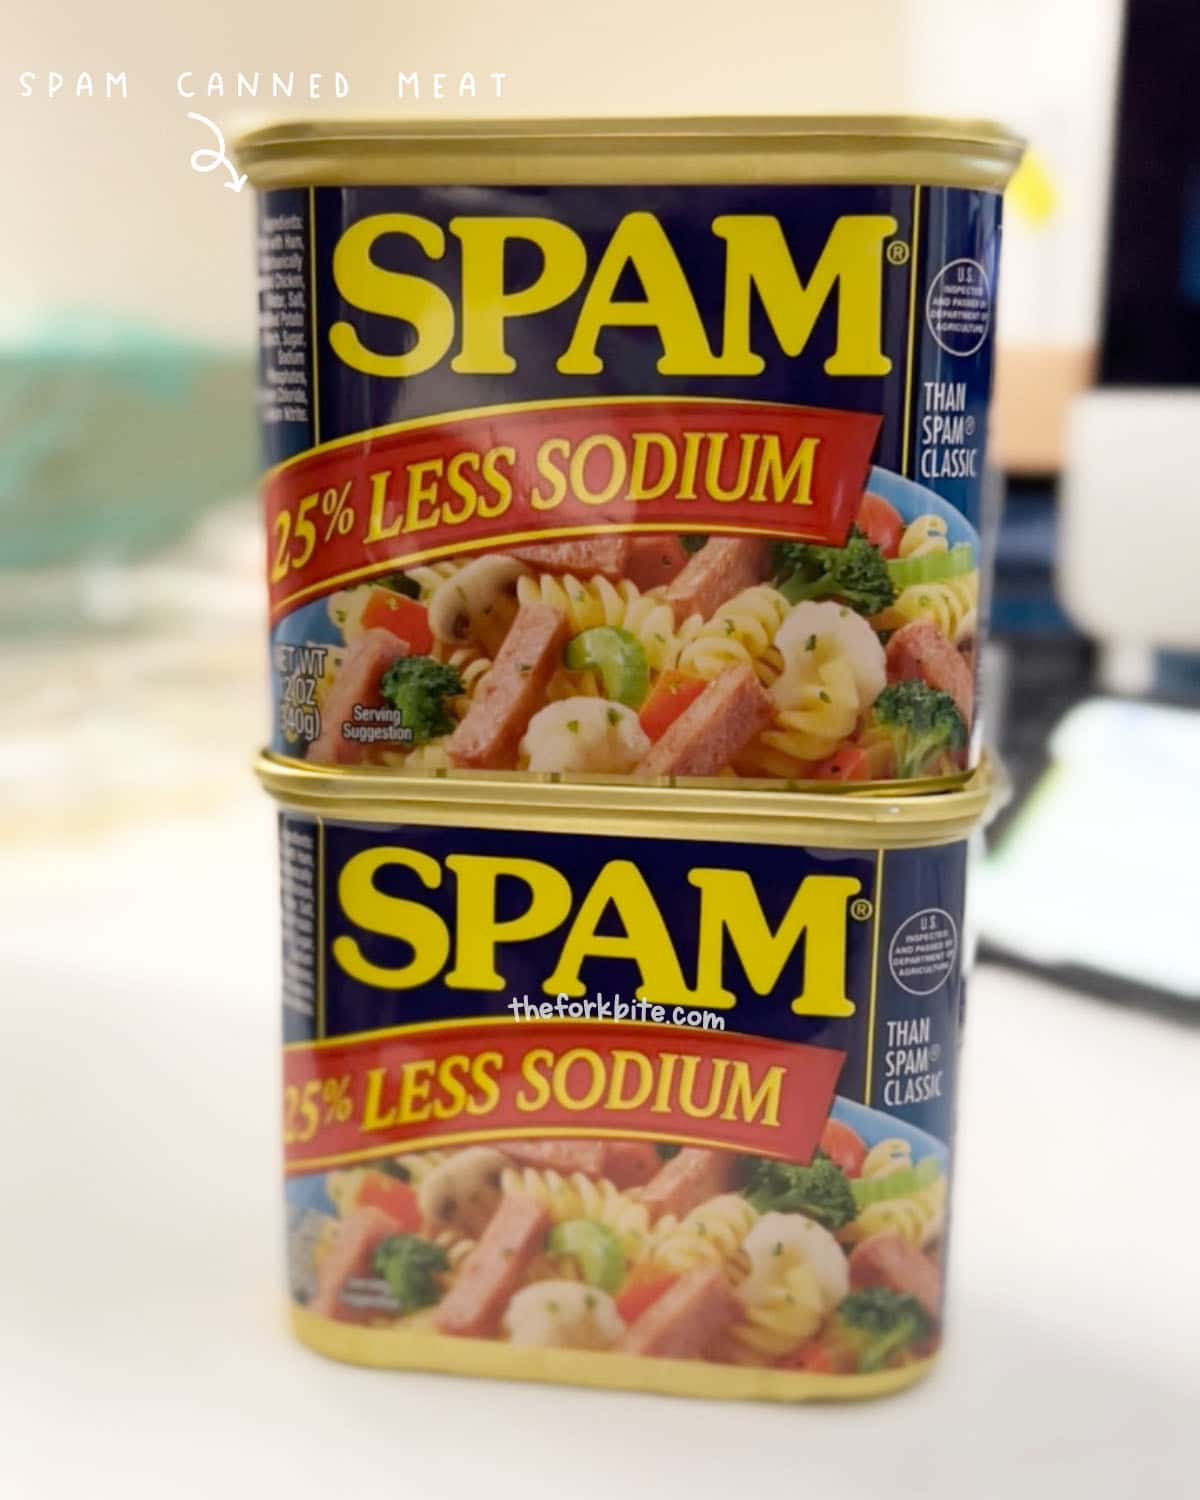 Wrap the spam tightly in plastic and double wrap with aluminum foil for extra protection. This way will help to prevent freezer burn.